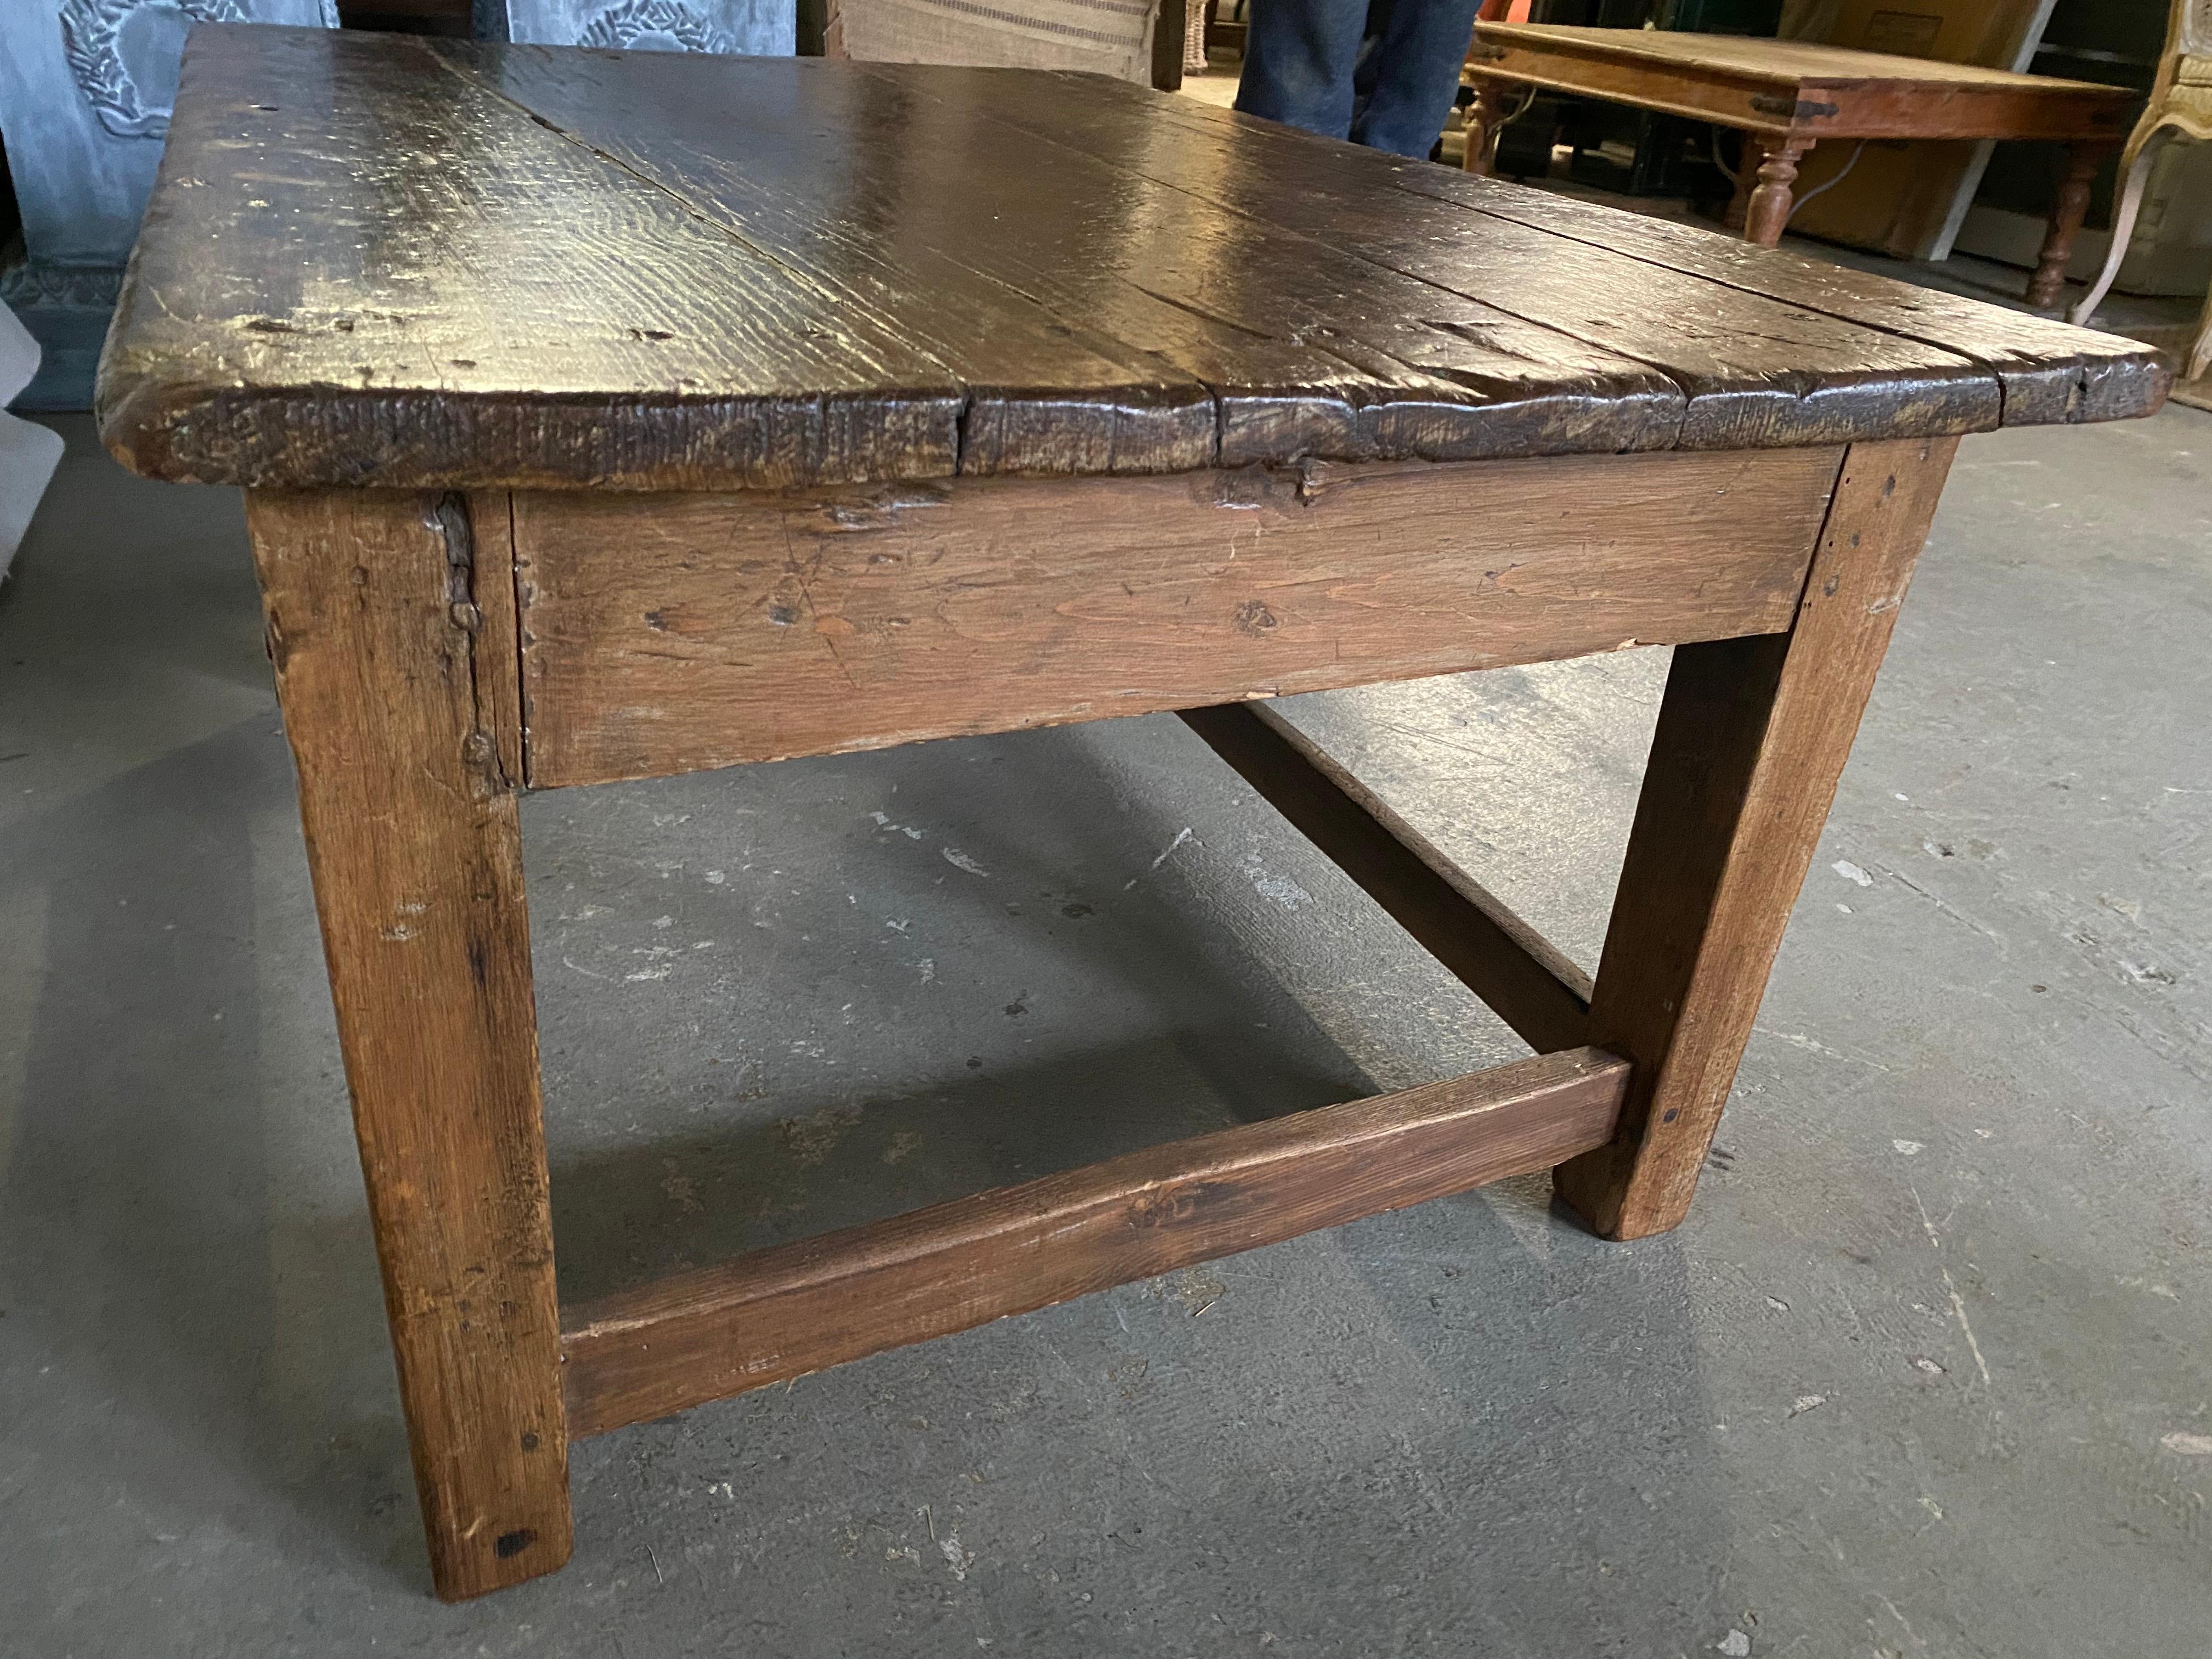 Hand-Crafted 19th Century Rustic Antique Coffee Table